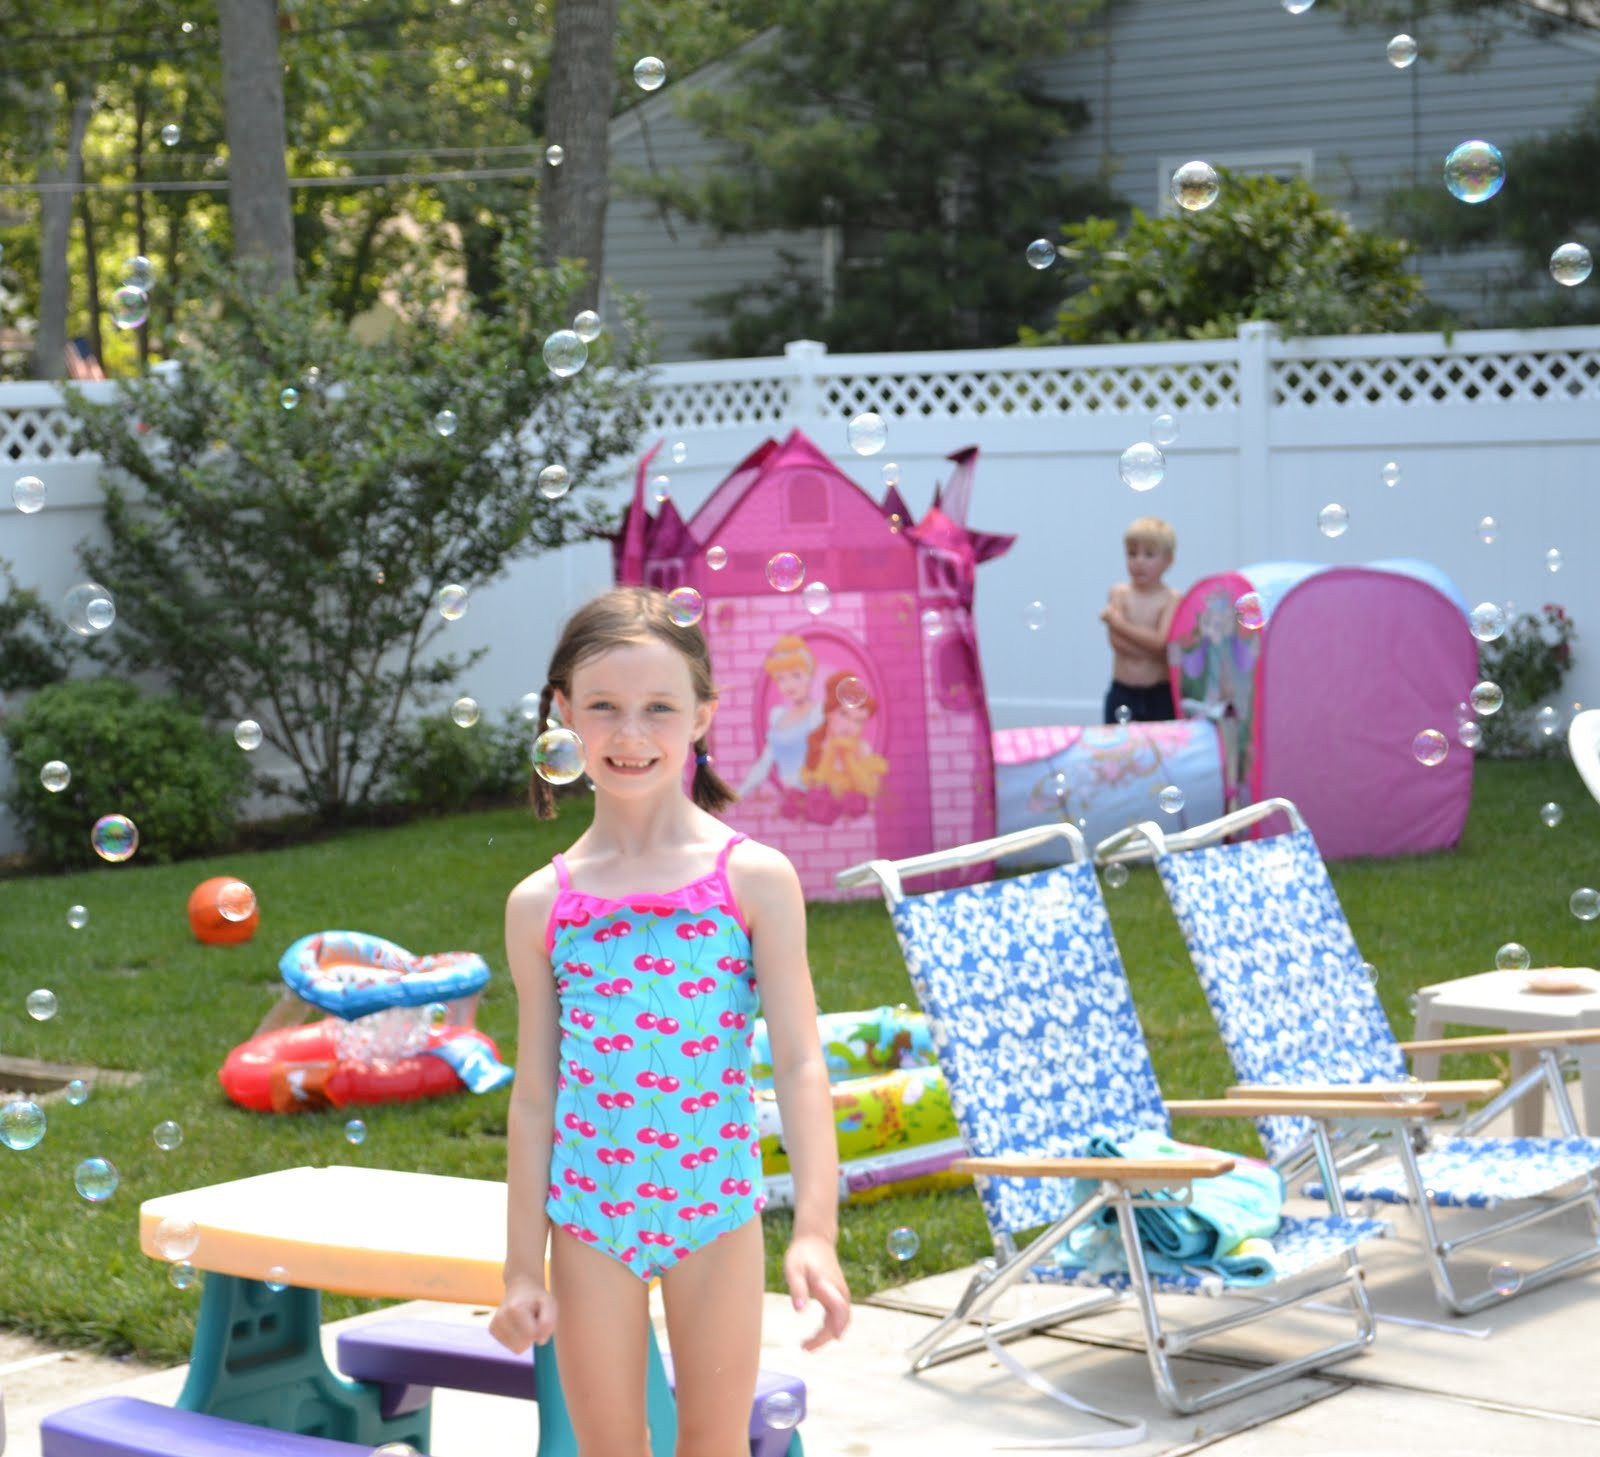 Pool Party Ideas For Girls
 Jersey Shore Journal A Princess Party for a 3 year old